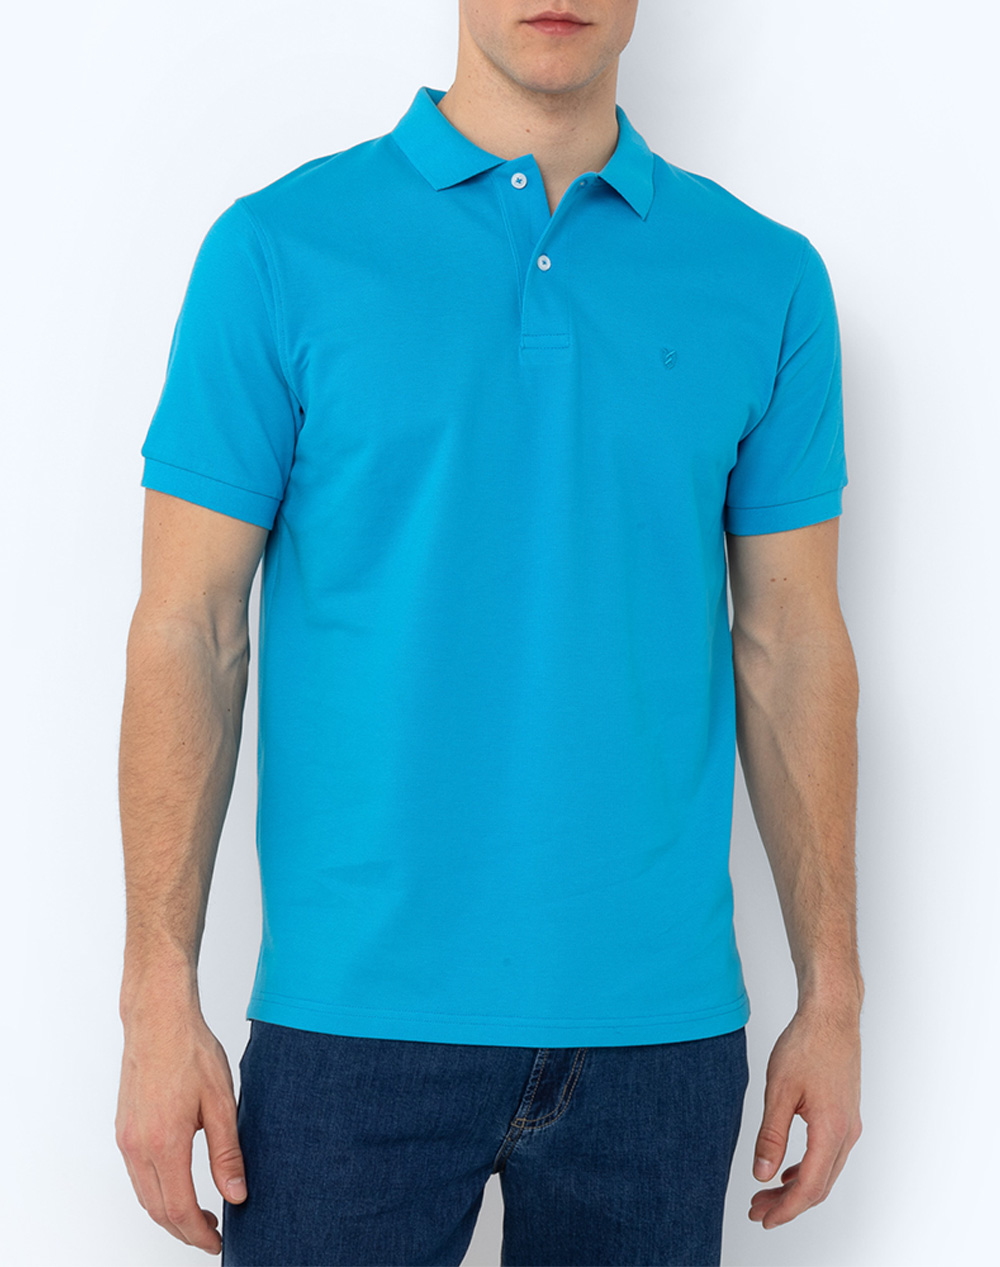 THE BOSTONIANS ΜΠΛΟΥΖΑ POLO PIQUE REGULAR FIT 3PS0001-TURQUOISE SkyBlue 3820ABOST3410092_10929